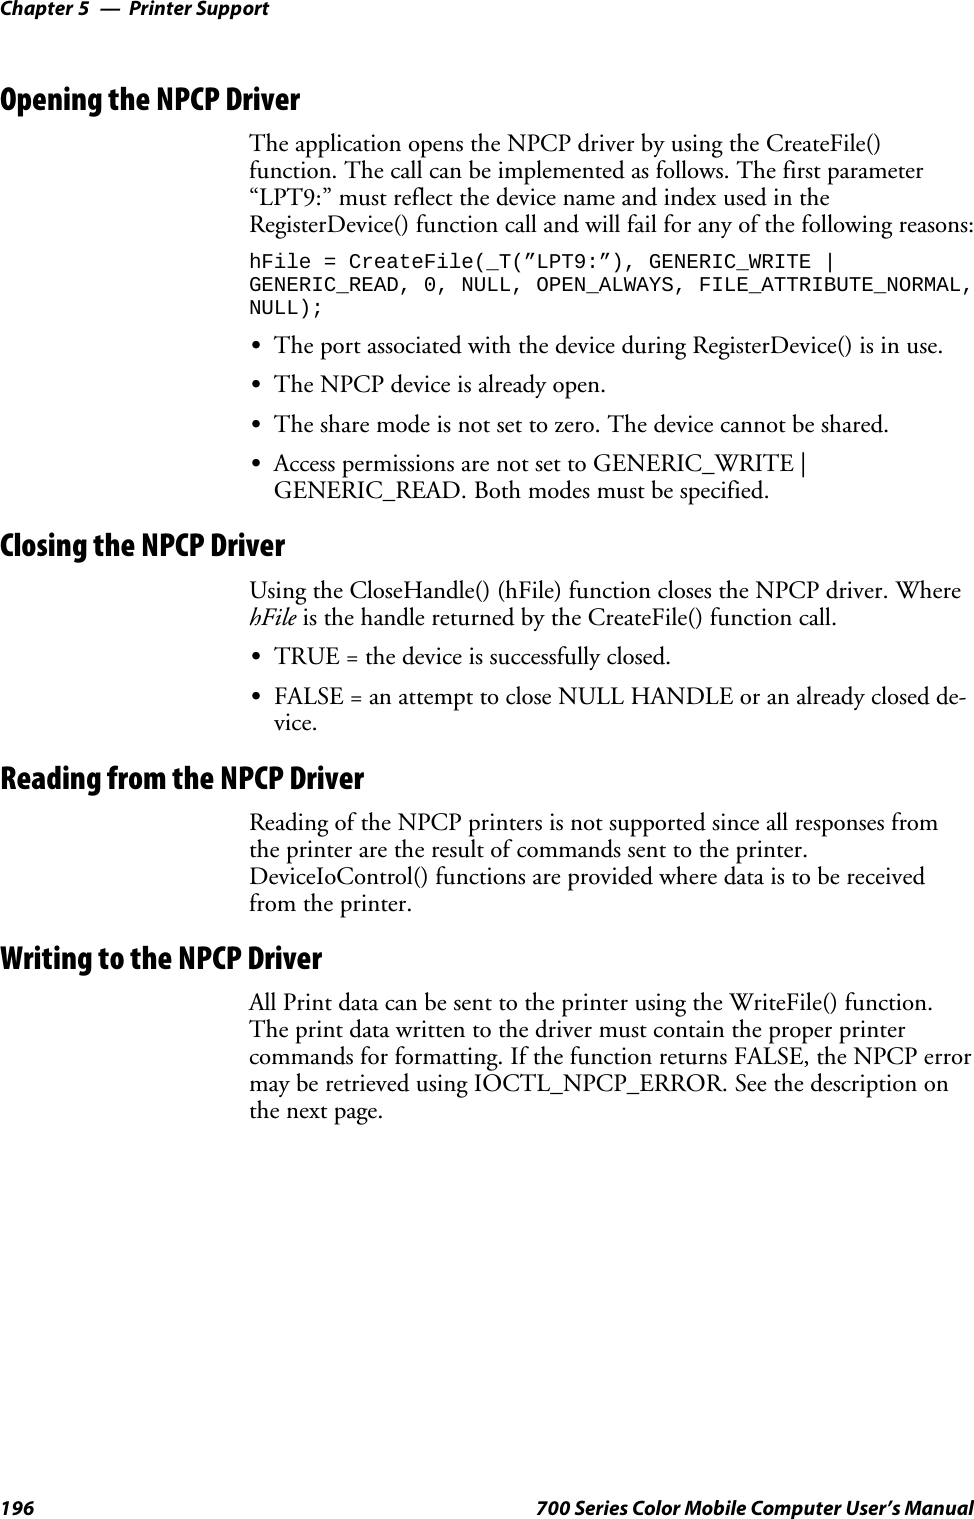 Printer SupportChapter —5196 700 Series Color Mobile Computer User’s ManualOpening the NPCP DriverTheapplicationopenstheNPCPdriverbyusingtheCreateFile()function. The call can be implemented as follows. The first parameter“LPT9:”mustreflectthedevicenameandindexusedintheRegisterDevice() function call and will fail for any of the following reasons:hFile = CreateFile(_T(”LPT9:”), GENERIC_WRITE |GENERIC_READ, 0, NULL, OPEN_ALWAYS, FILE_ATTRIBUTE_NORMAL,NULL);SThe port associated with the device during RegisterDevice() is in use.SThe NPCP device is already open.SThe share mode is not set to zero. The device cannot be shared.SAccess permissions are not set to GENERIC_WRITE |GENERIC_READ. Both modes must be specified.Closing the NPCP DriverUsing the CloseHandle() (hFile) function closes the NPCP driver. WherehFile is the handle returned by the CreateFile() function call.STRUE = the device is successfully closed.SFALSE = an attempt to close NULL HANDLE or an already closed de-vice.Reading from the NPCP DriverReading of the NPCP printers is not supported since all responses fromthe printer are the result of commands sent to the printer.DeviceIoControl() functions are provided where data is to be receivedfrom the printer.Writing to the NPCP DriverAll Print data can be sent to the printer using the WriteFile() function.The print data written to the driver must contain the proper printercommands for formatting. If the function returns FALSE, the NPCP errormay be retrieved using IOCTL_NPCP_ERROR. See the description onthe next page.